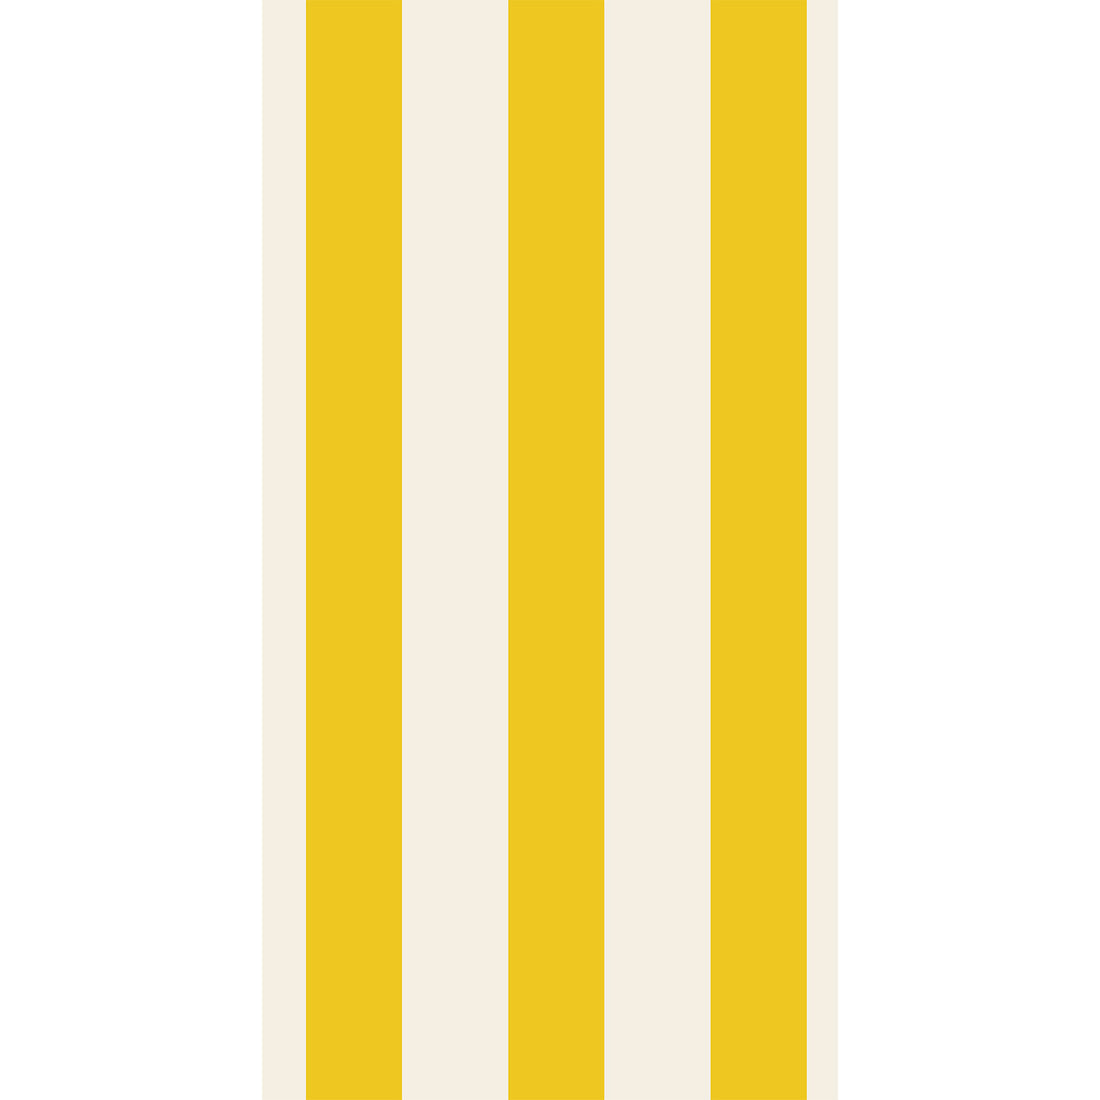 A rectangle guest napkin with vertical bright yellow and white stripes.